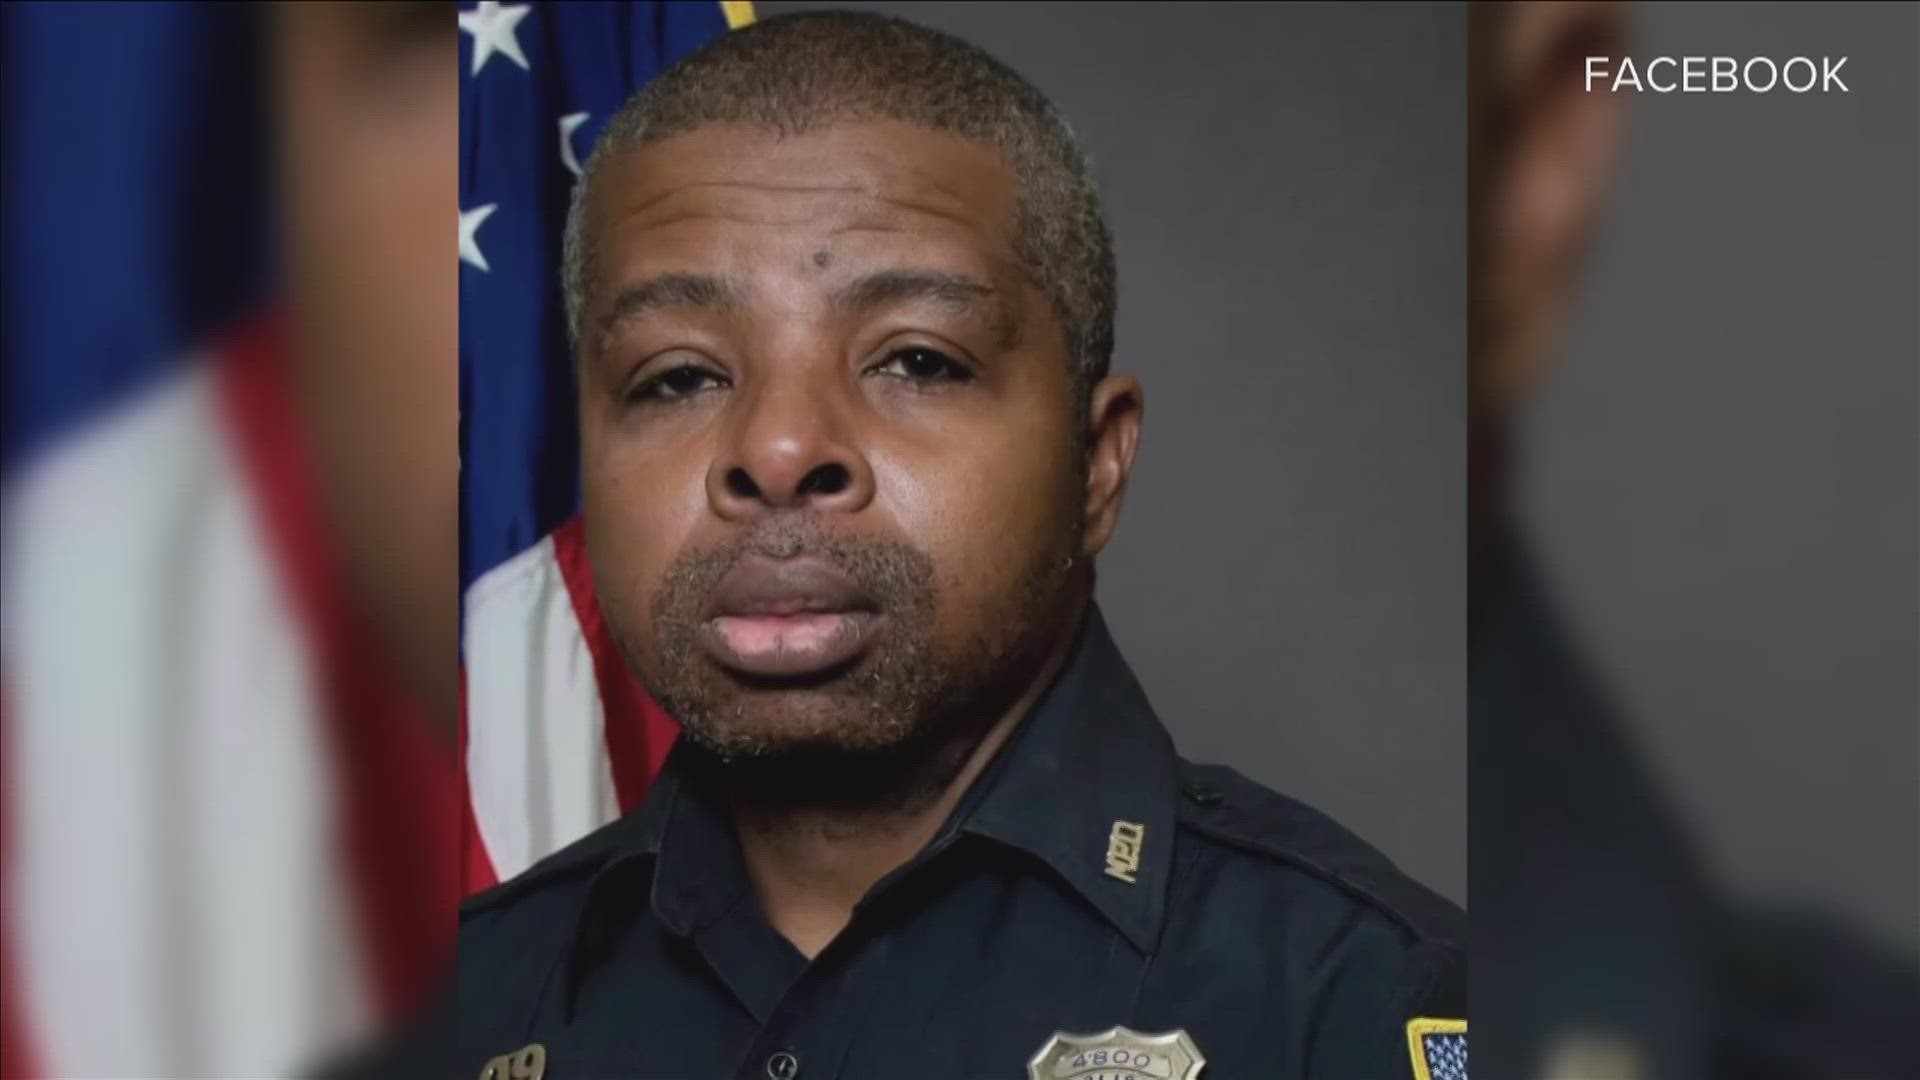 MPD officer Geoffrey Redd remains in critical condition after a shooting at the Poplar-White Station library on Thursday afternoon, according to Bishop Porter.